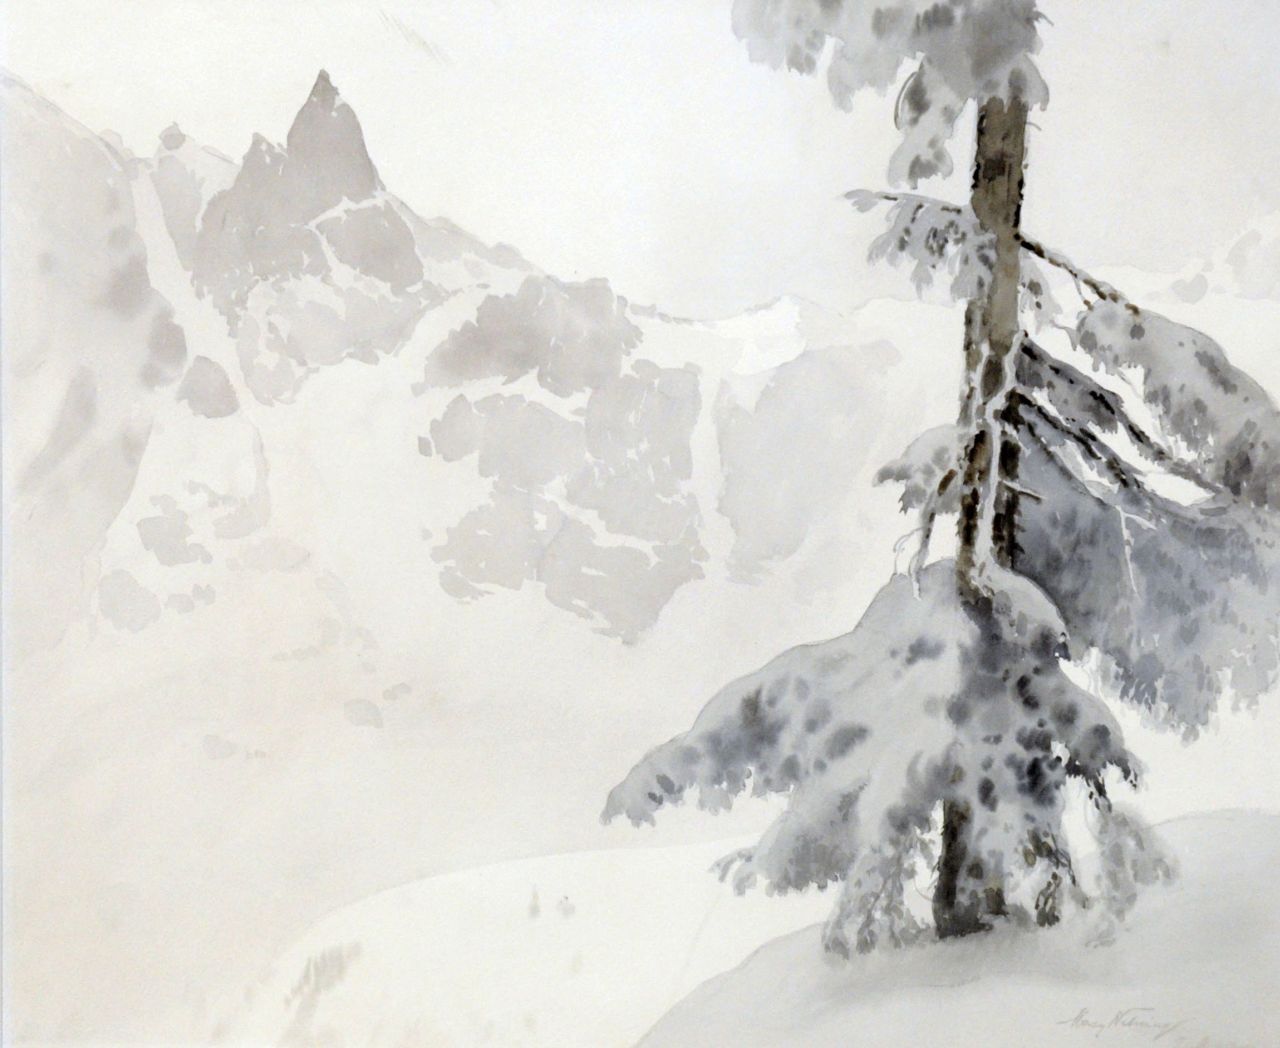 Maciej Nehring | Winter landscape, Poland, watercolour on paper, 60.2 x 72.5 cm, signed l.r. (indistinctly)